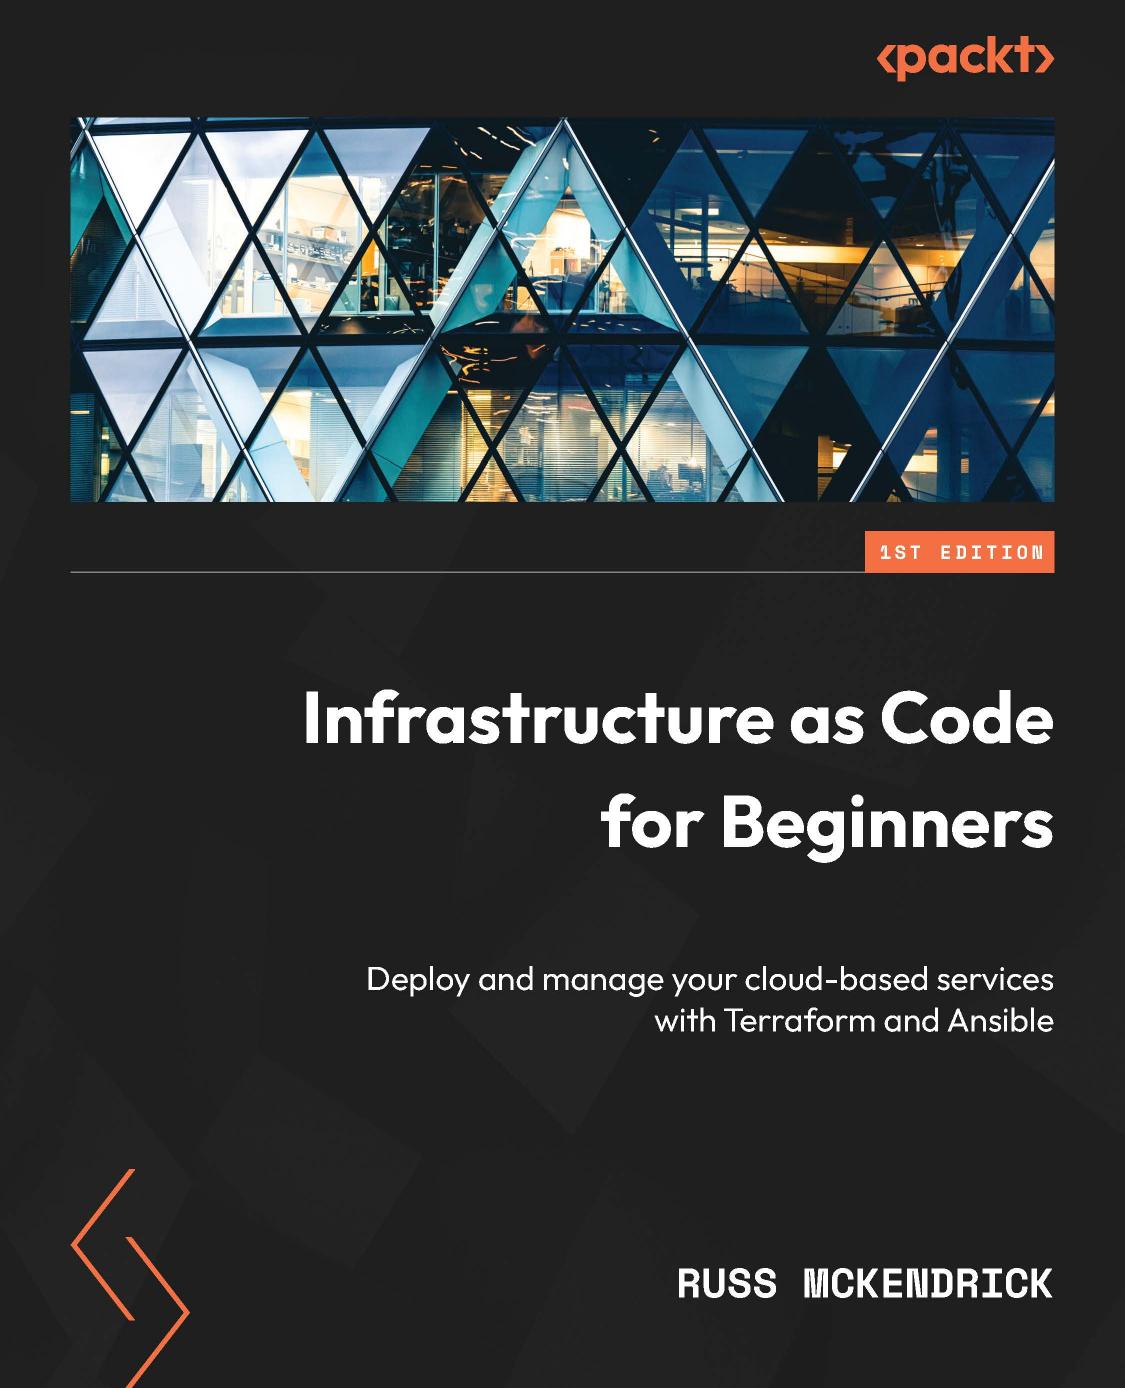 Infrastructure as Code for Beginners: Deploy and manage your cloud-based services with Terraform and Ansible by Russ McKendrick